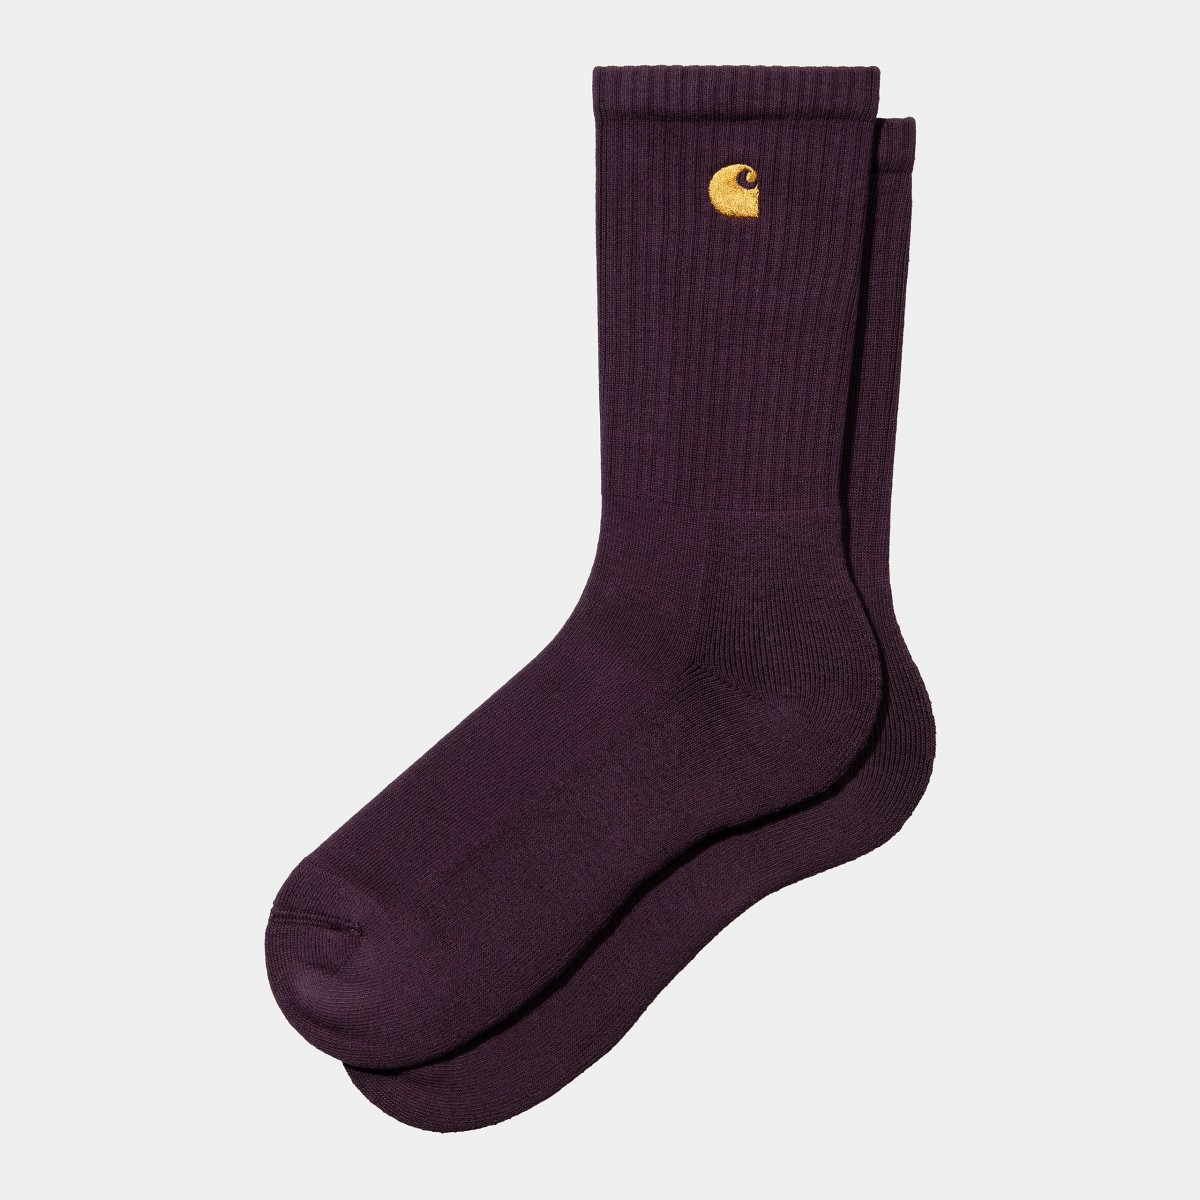 Carhartt WIP - Chaussettes bleues et or